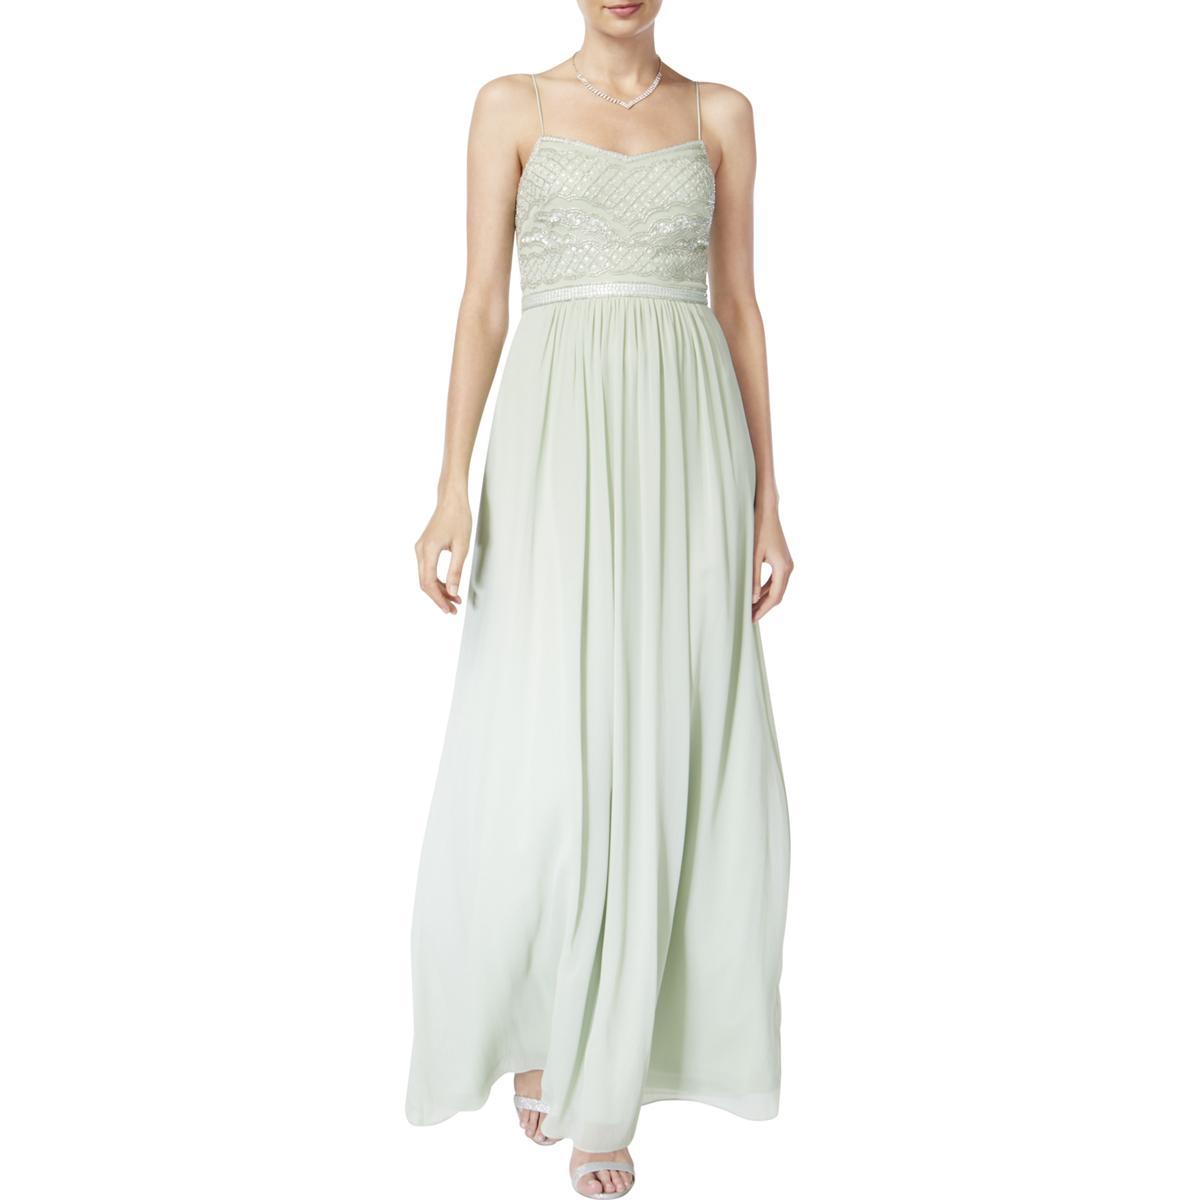 Adrianna Papell Womens Green Chiffon Embellished Evening Dress Gown 10 ...